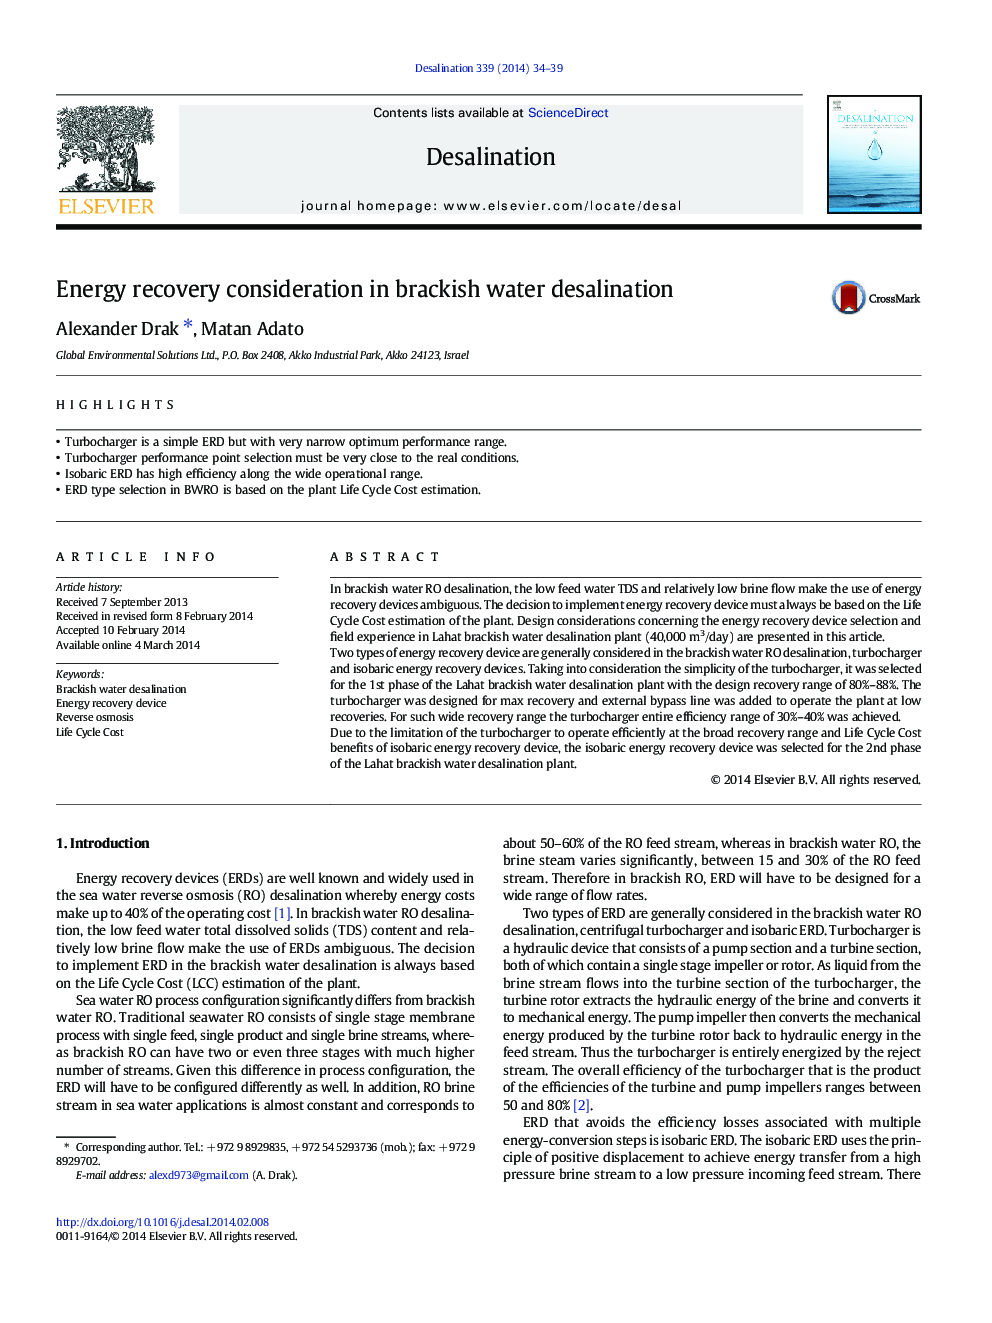 Energy recovery consideration in brackish water desalination